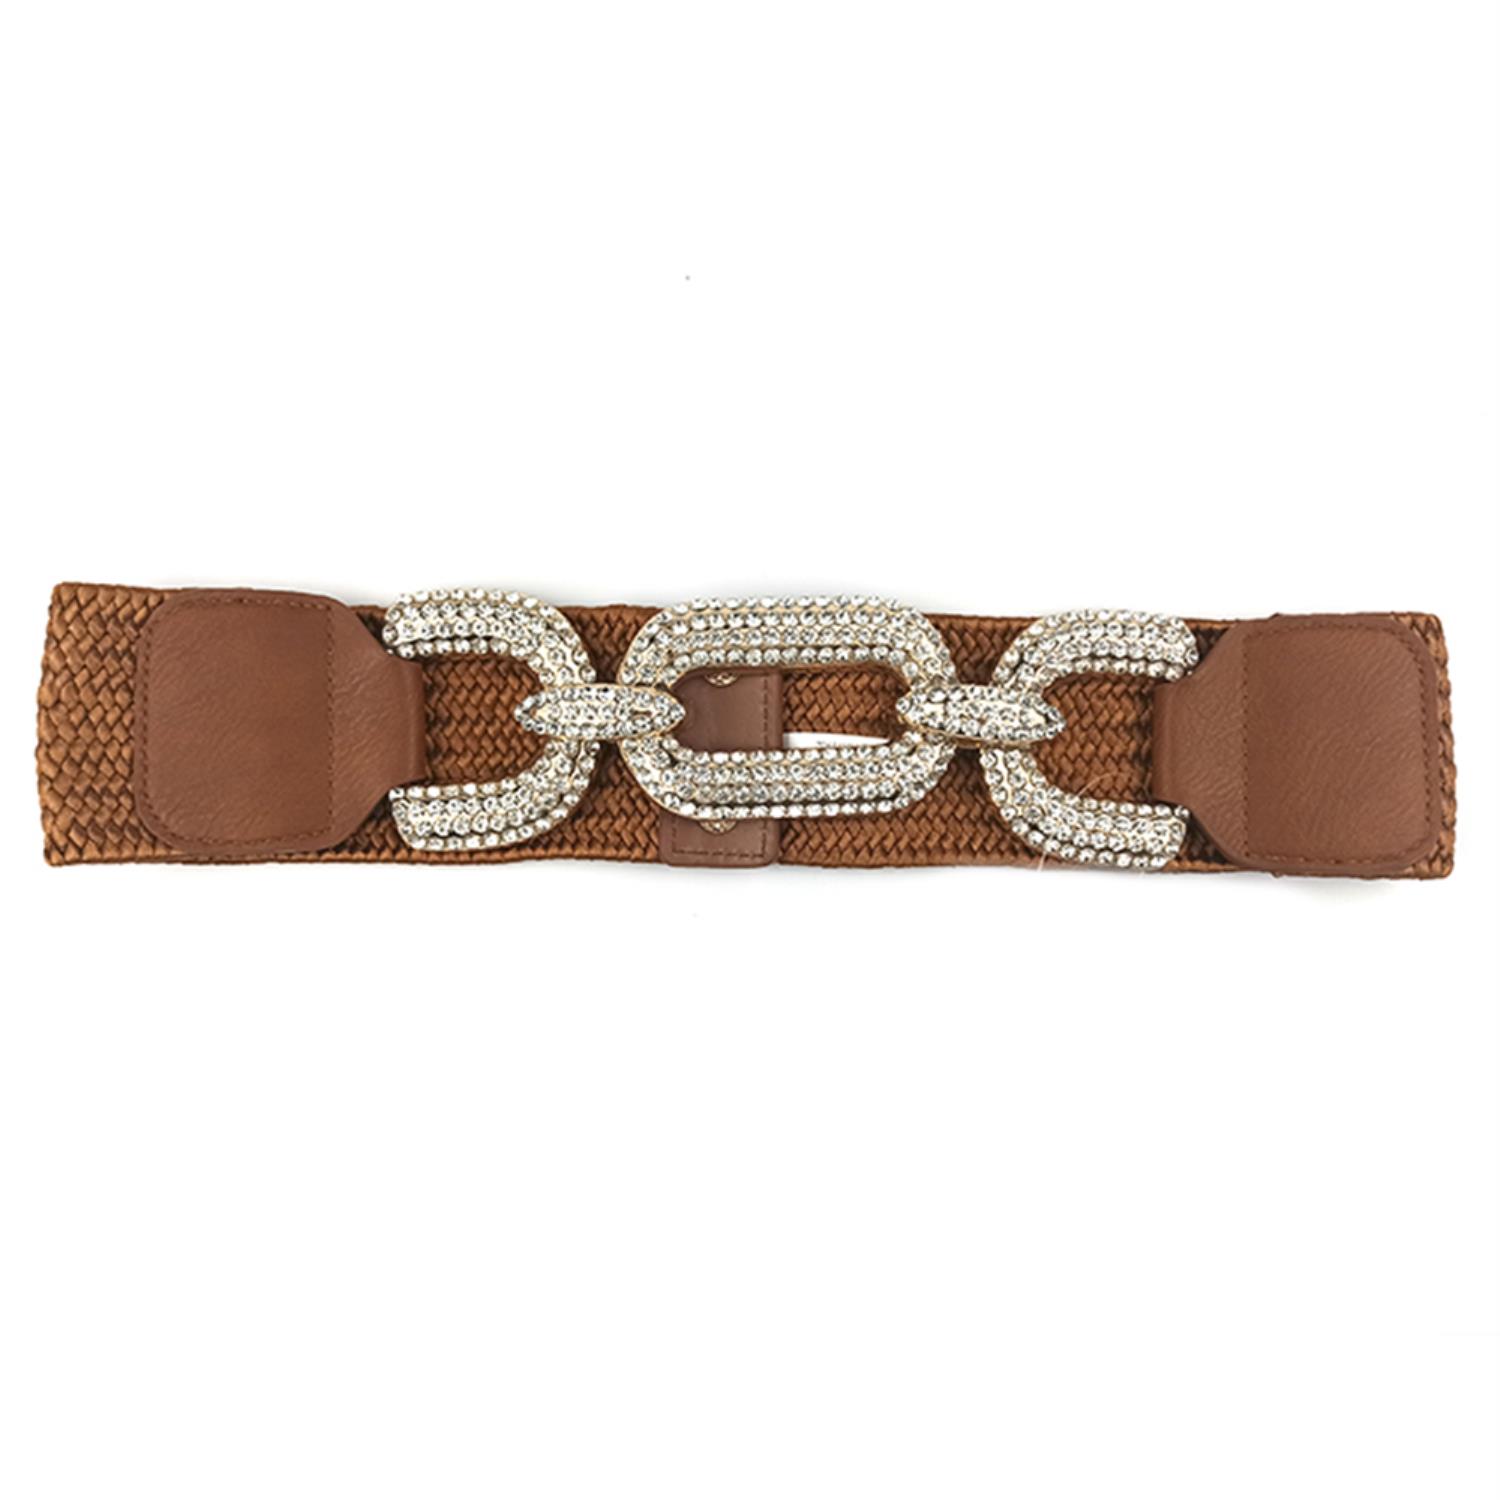 CAMEL - Rhinestone Buckle Elastic Belt - 2 colors - Ships from The US - belt at TFC&H Co.